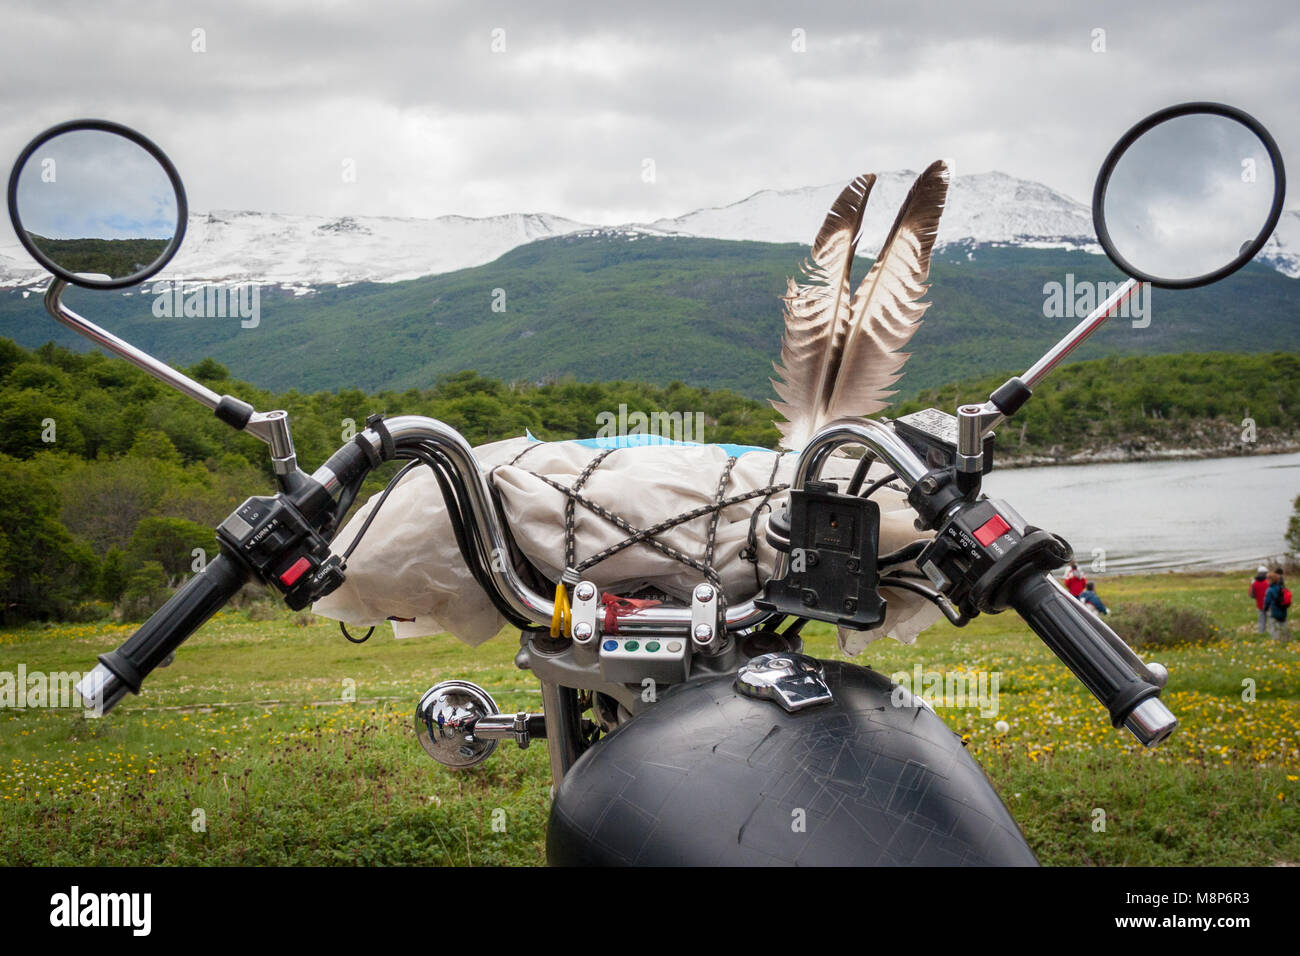 Motorcycles from all over the world meet in Ushuaia for the annual convention known as 'Latitude 54.' Stock Photo